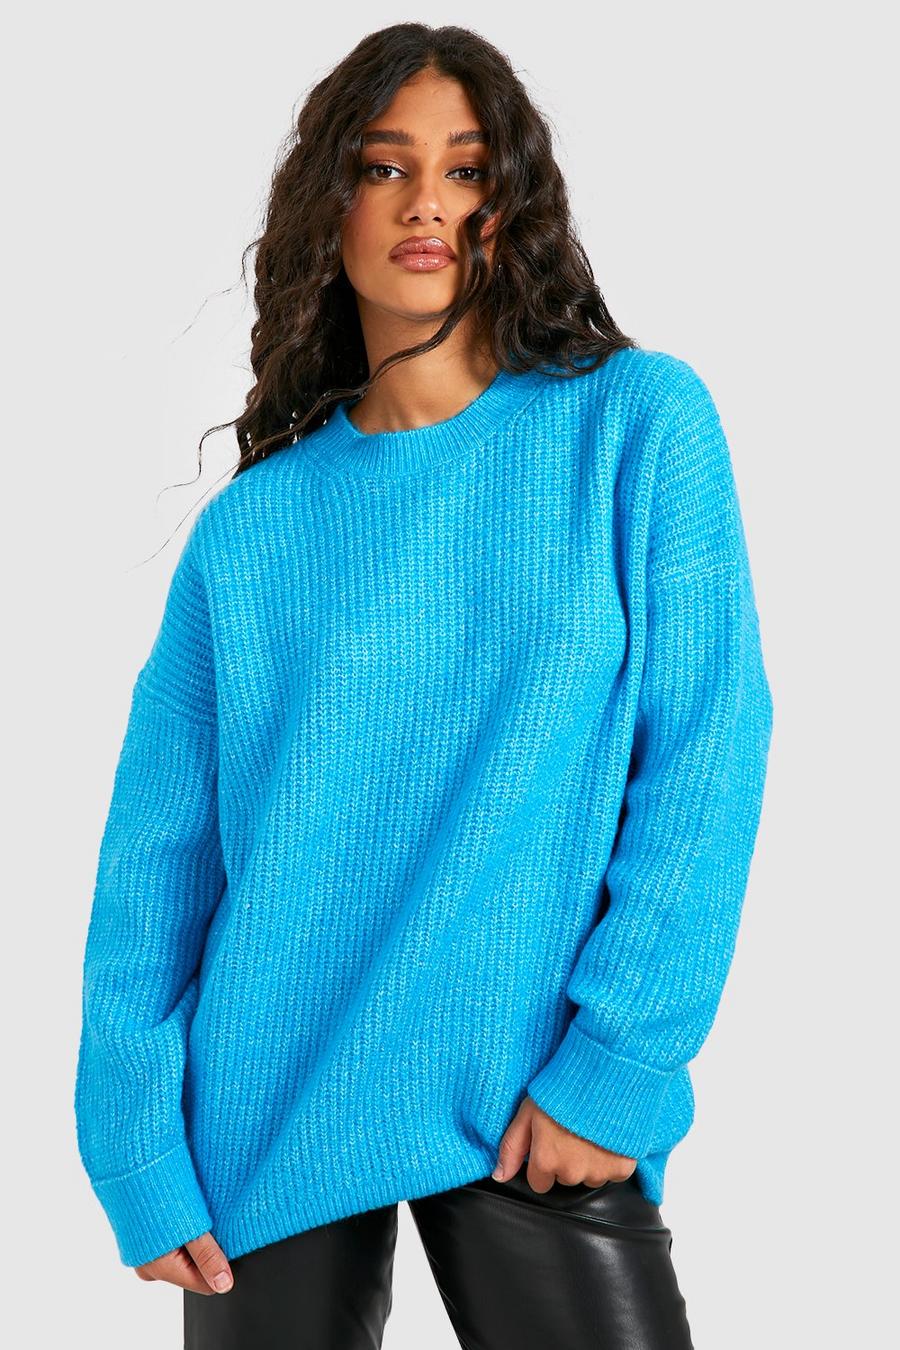 Turquoise Turn Up Cuff Soft Knit Fisherman Knitted Sweater